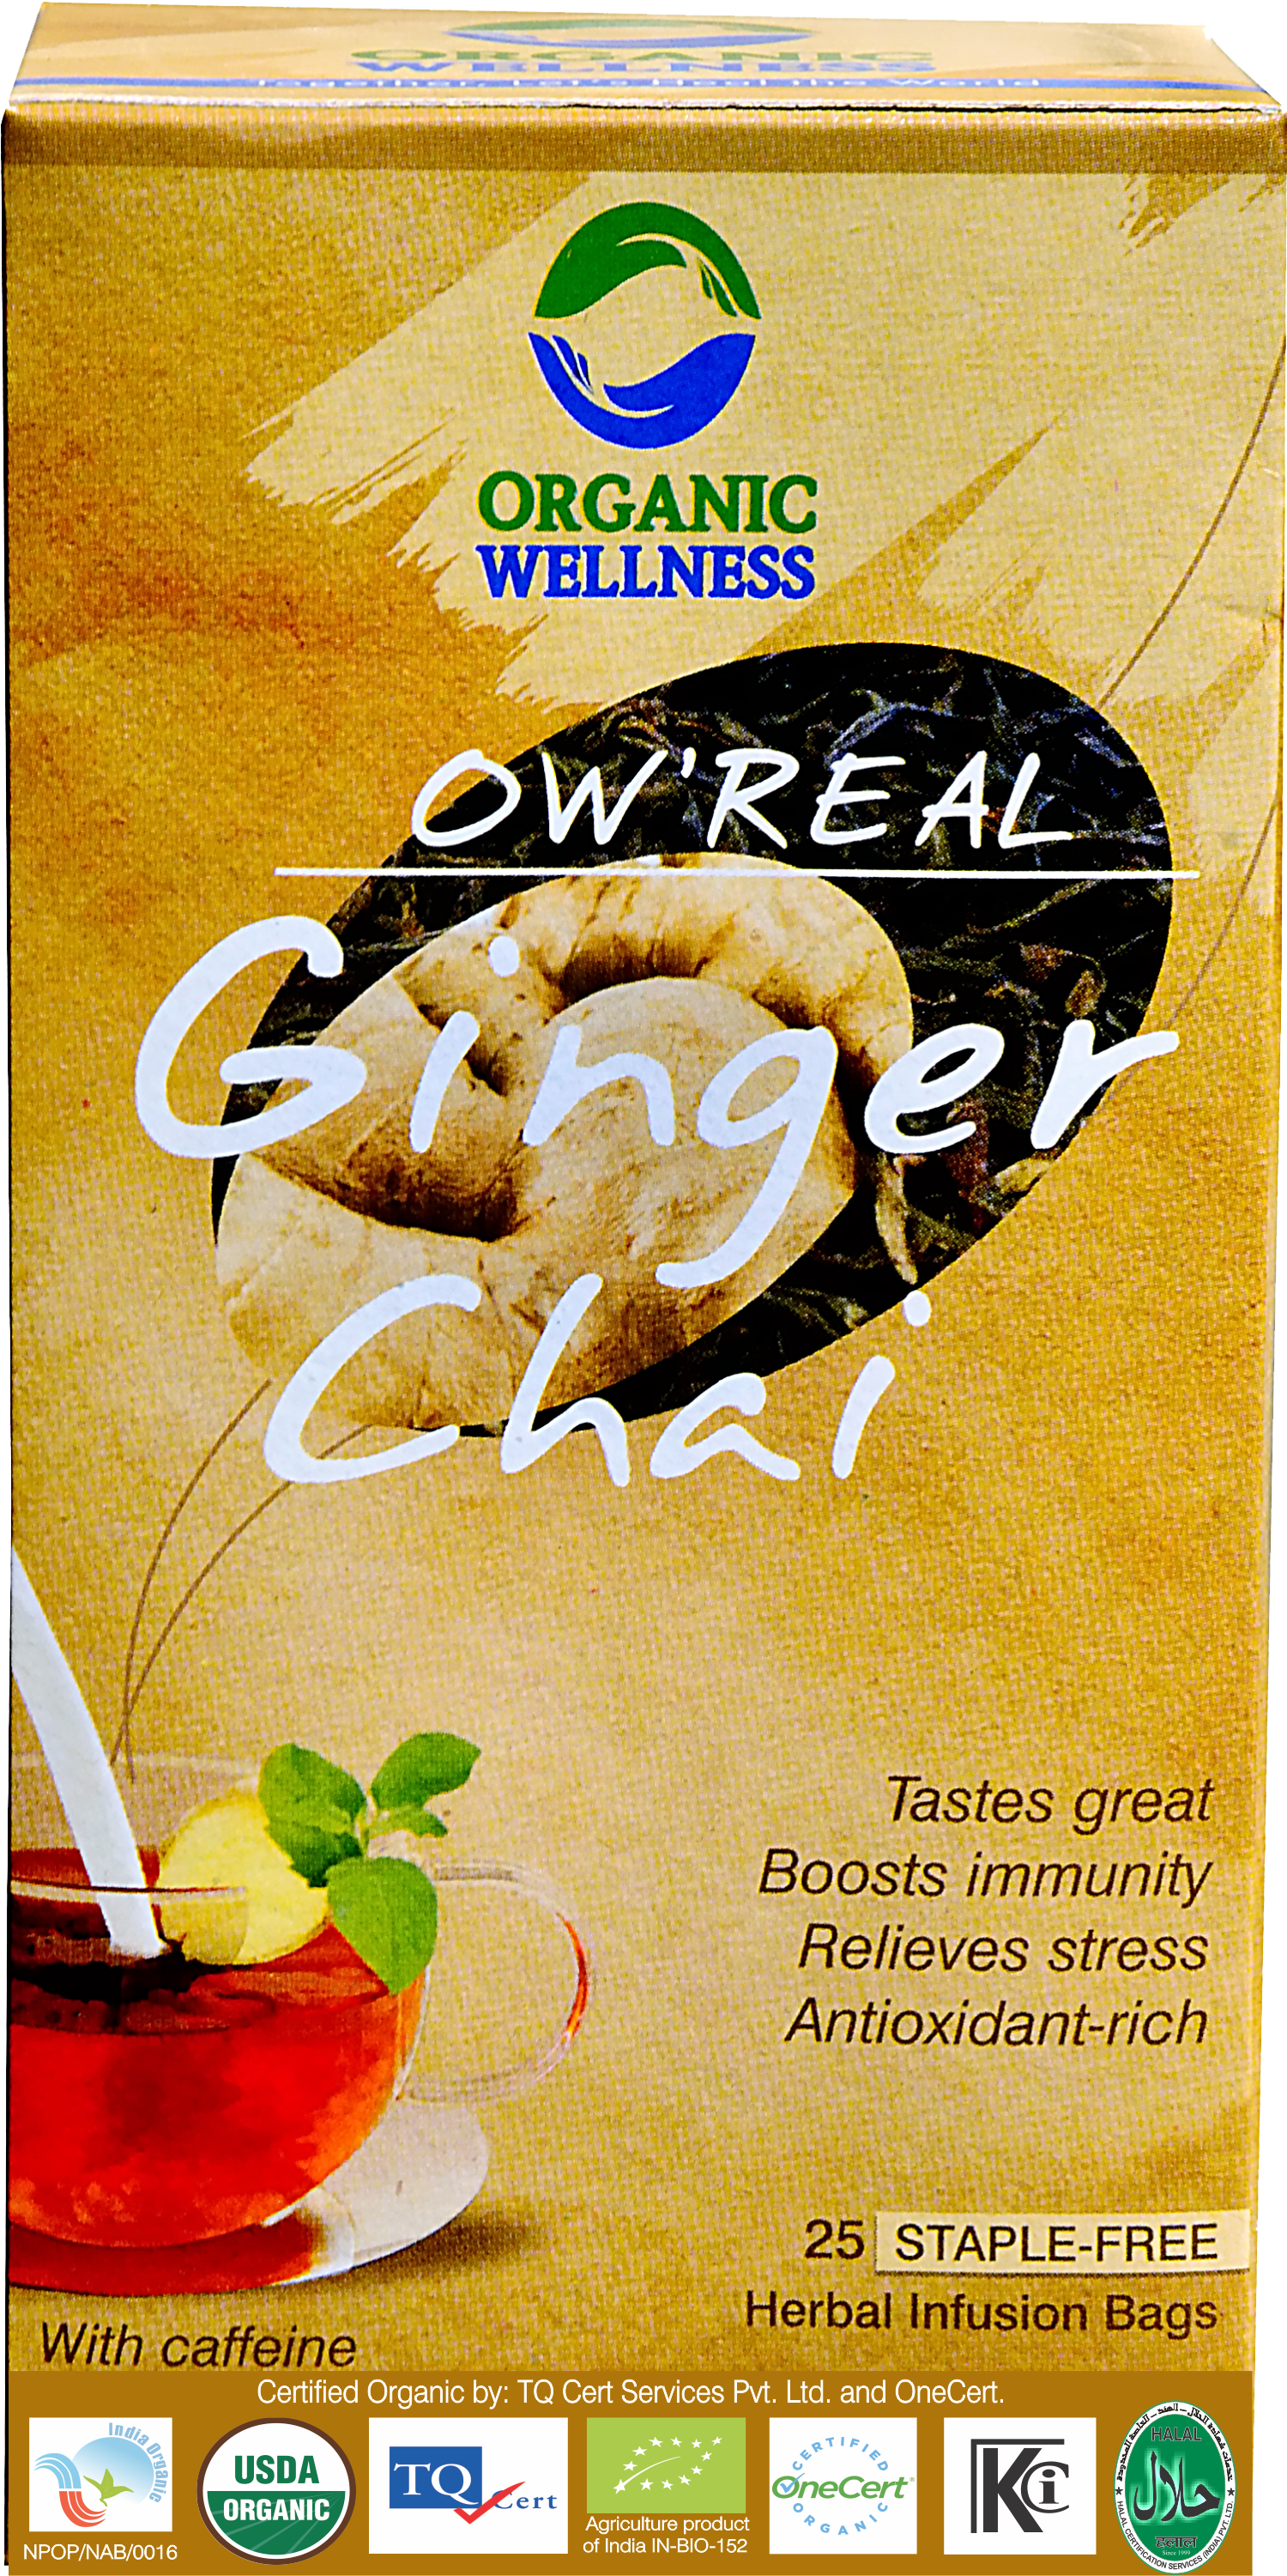 Buy Organic Wellness Real Ginger Chai Tea at Best Price Online